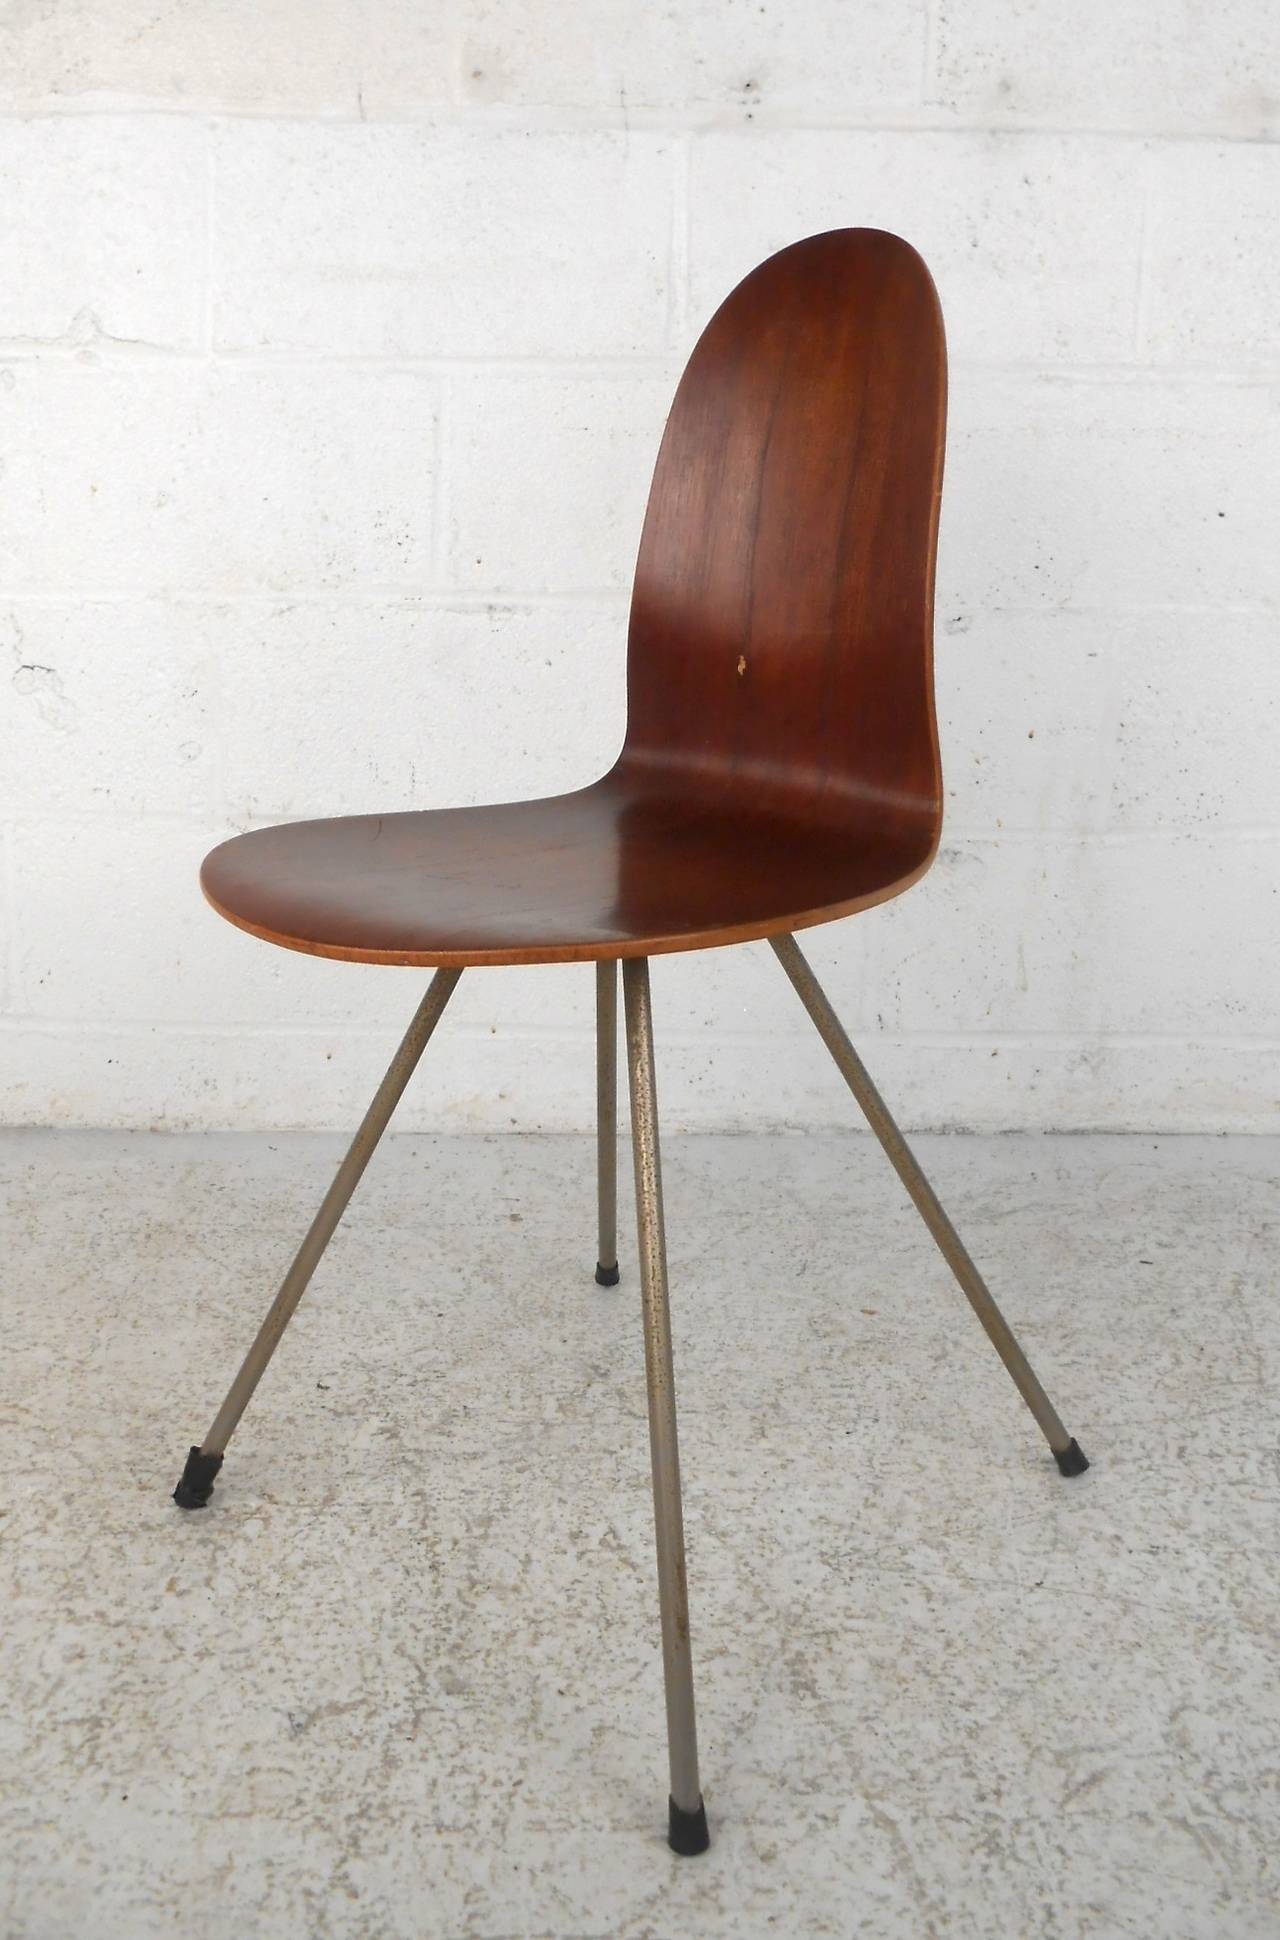 Mid-Century Modern Danish chair from Illums Bolighus, featuring strong steam formed one-piece seat and back set on sturdy metal legs. Well-made Danish design with a modern flair.

(Please confirm item location - NY or NJ - with dealer).